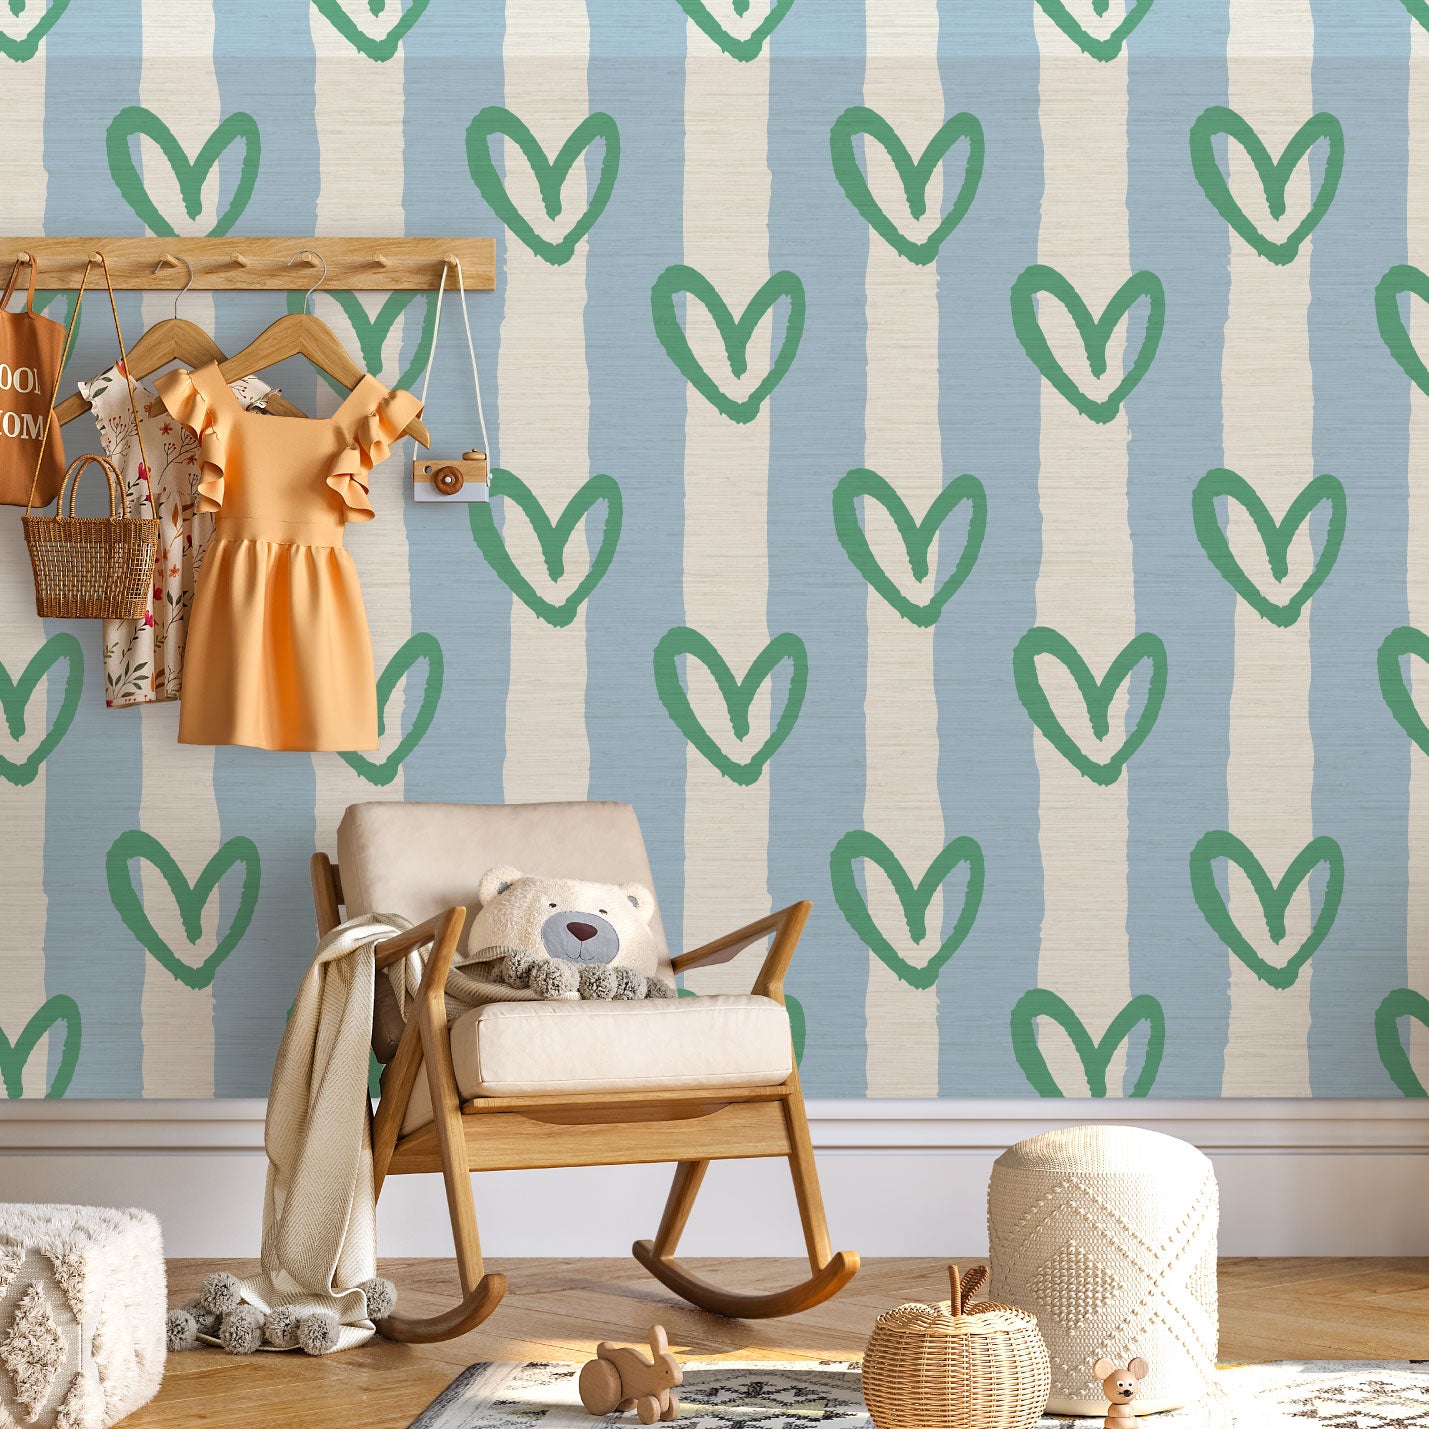 hearts vertical wide stripes house of shan collaboration kids playroom nursery Grasscloth wallpaper Natural Textured Eco-Friendly Non-toxic High-quality Sustainable Interior Design Bold Custom Tailor-made Retro chic Bold fun french blue white green living room nursery kids bedroom